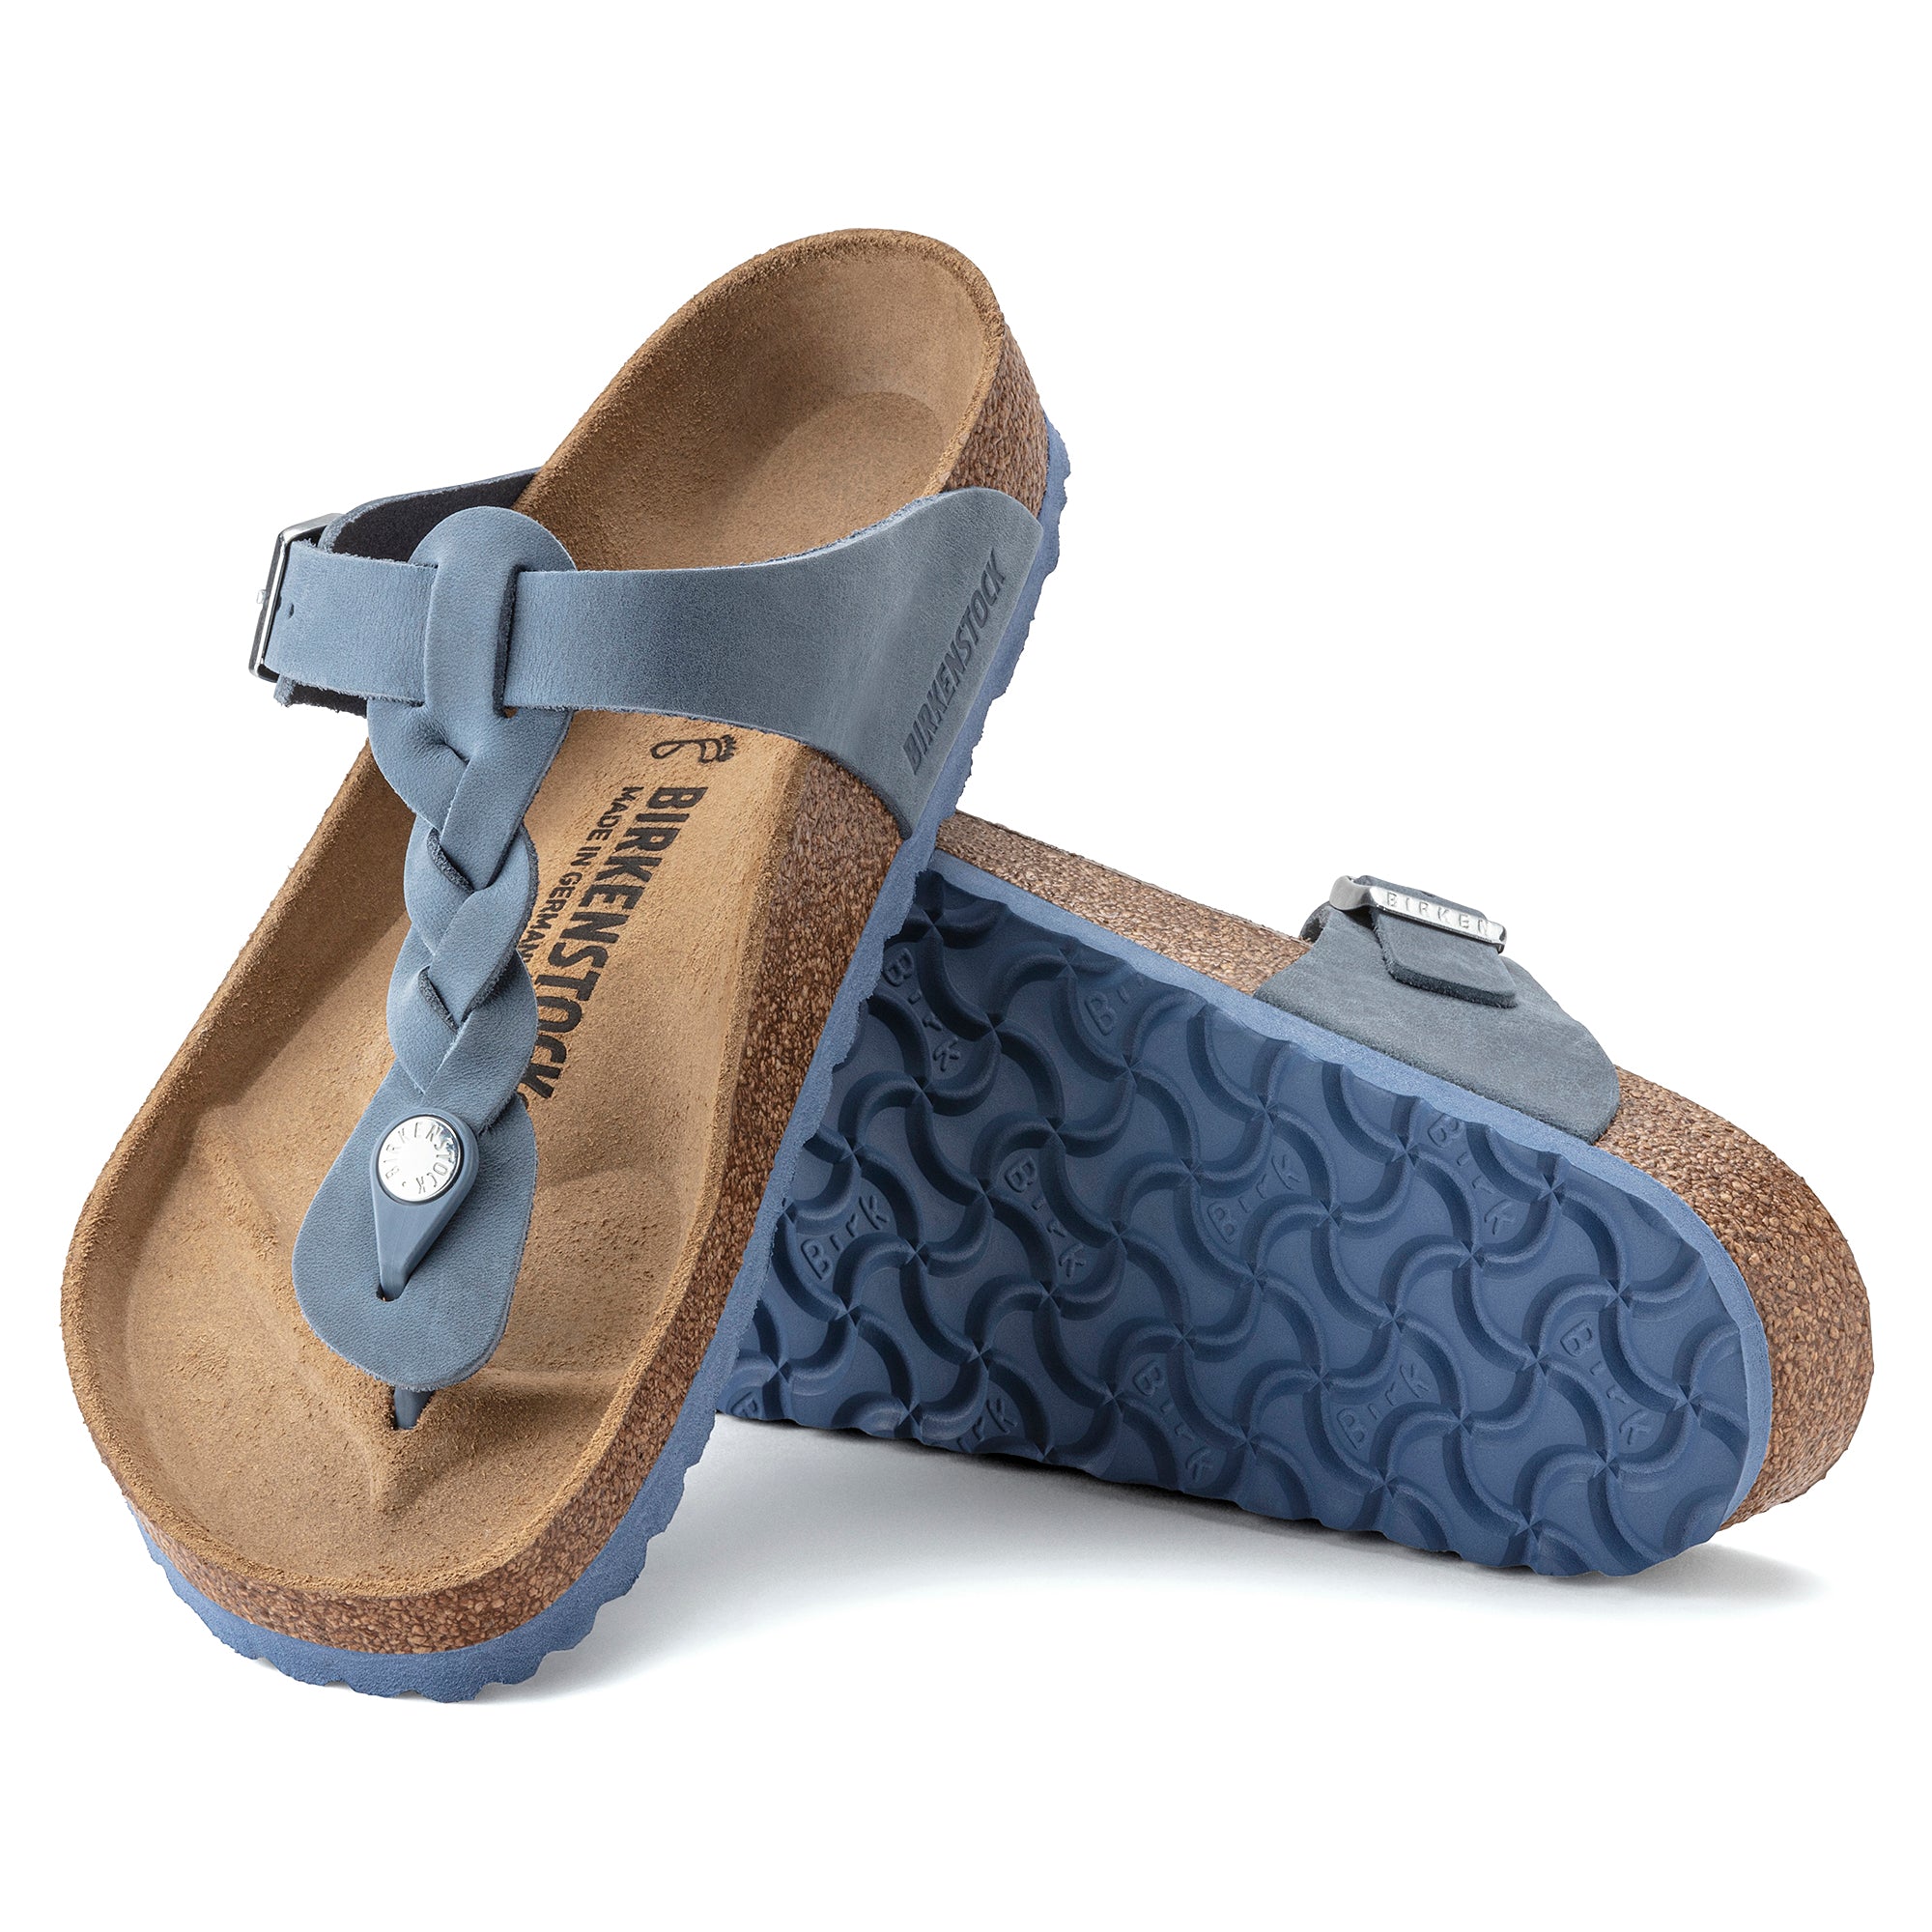 Birkenstock Limited Edition Gizeh Braid dusty blue oiled leather